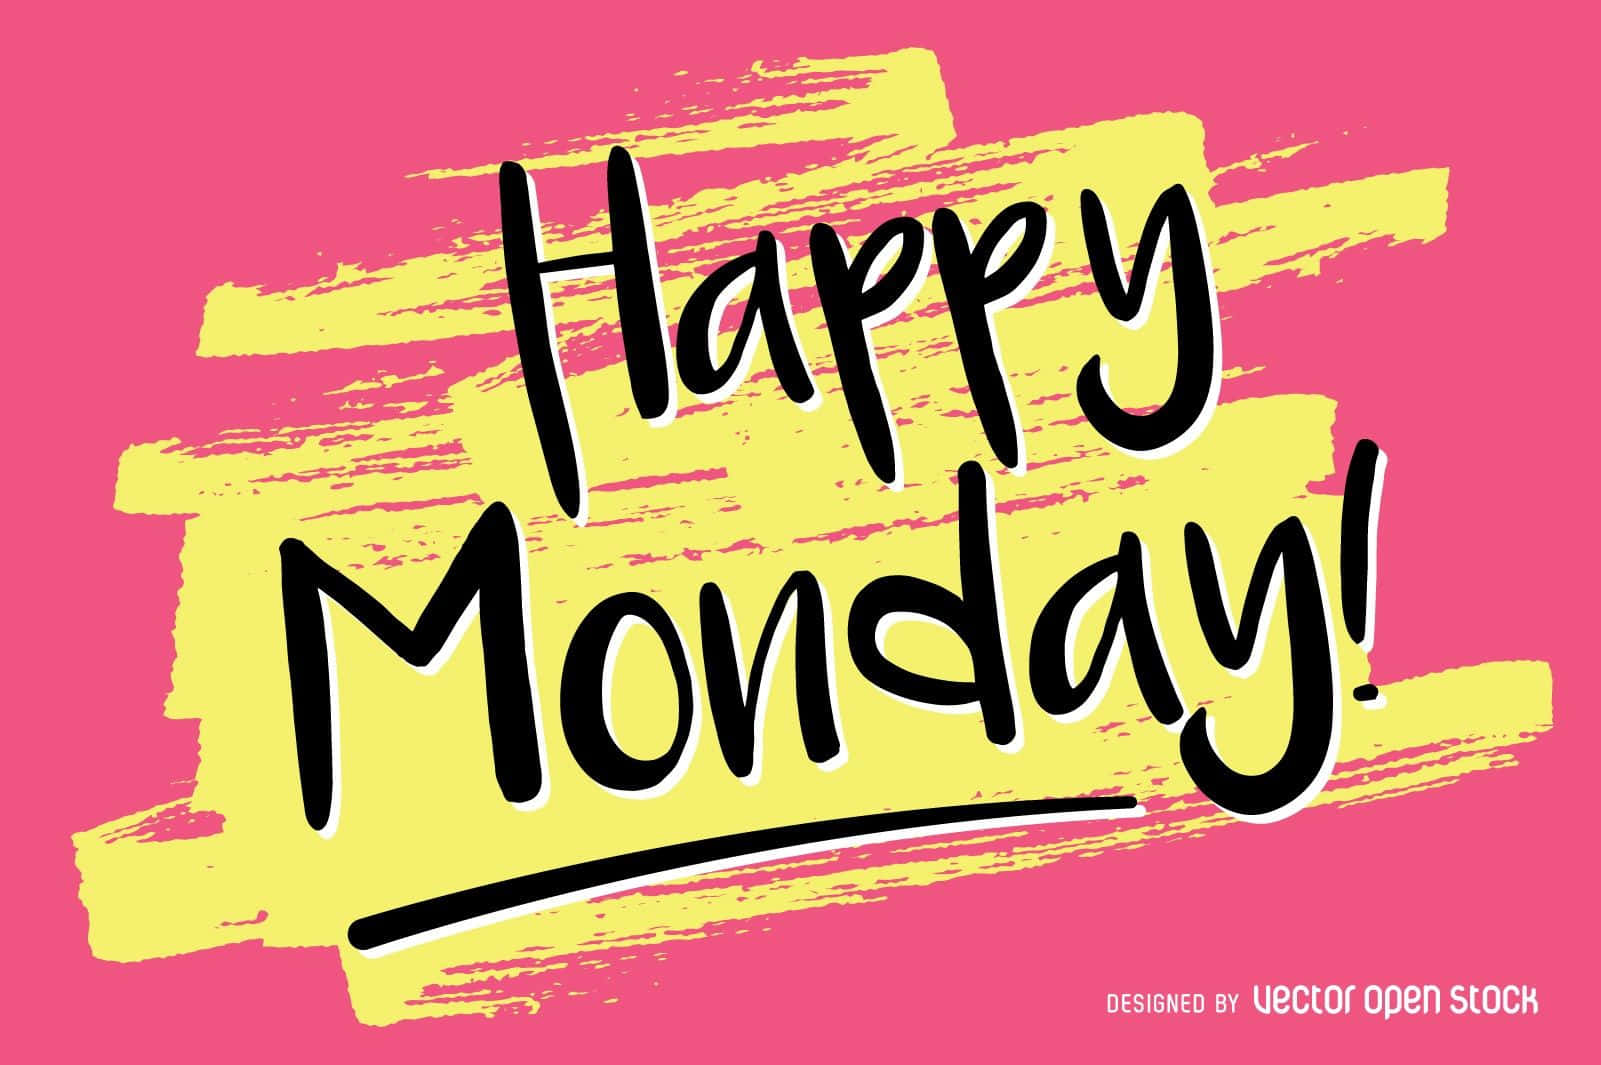 Happy Monday Handwritten Text On A Pink Background